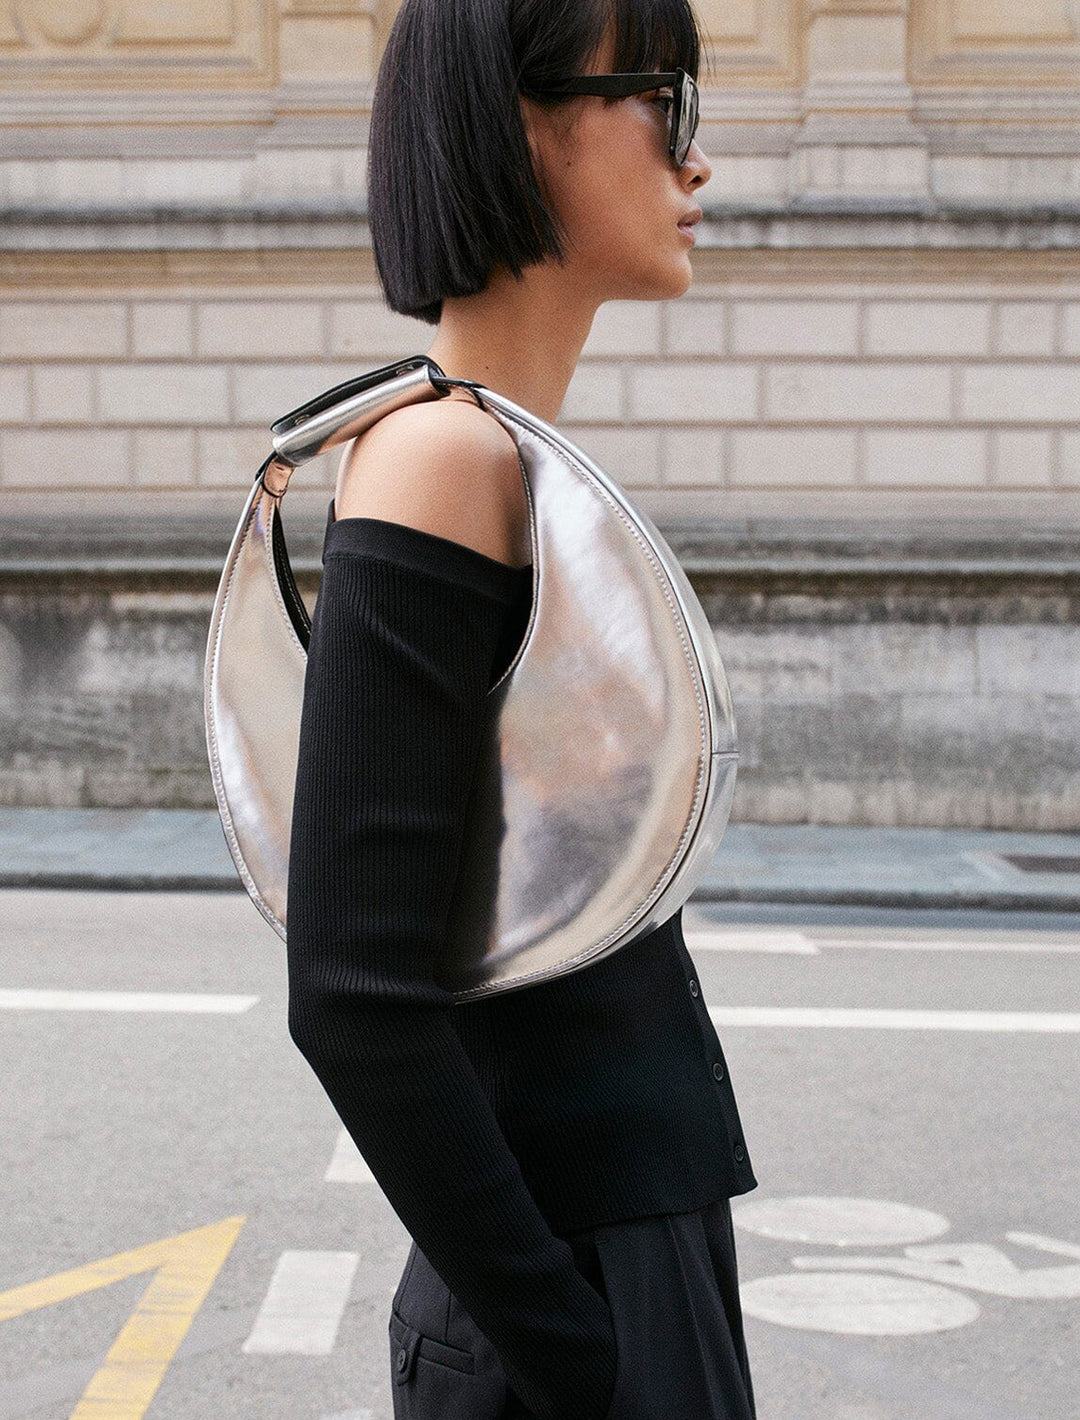 Model wearing STAUD's moon tote bag in chrome on her shoulder.